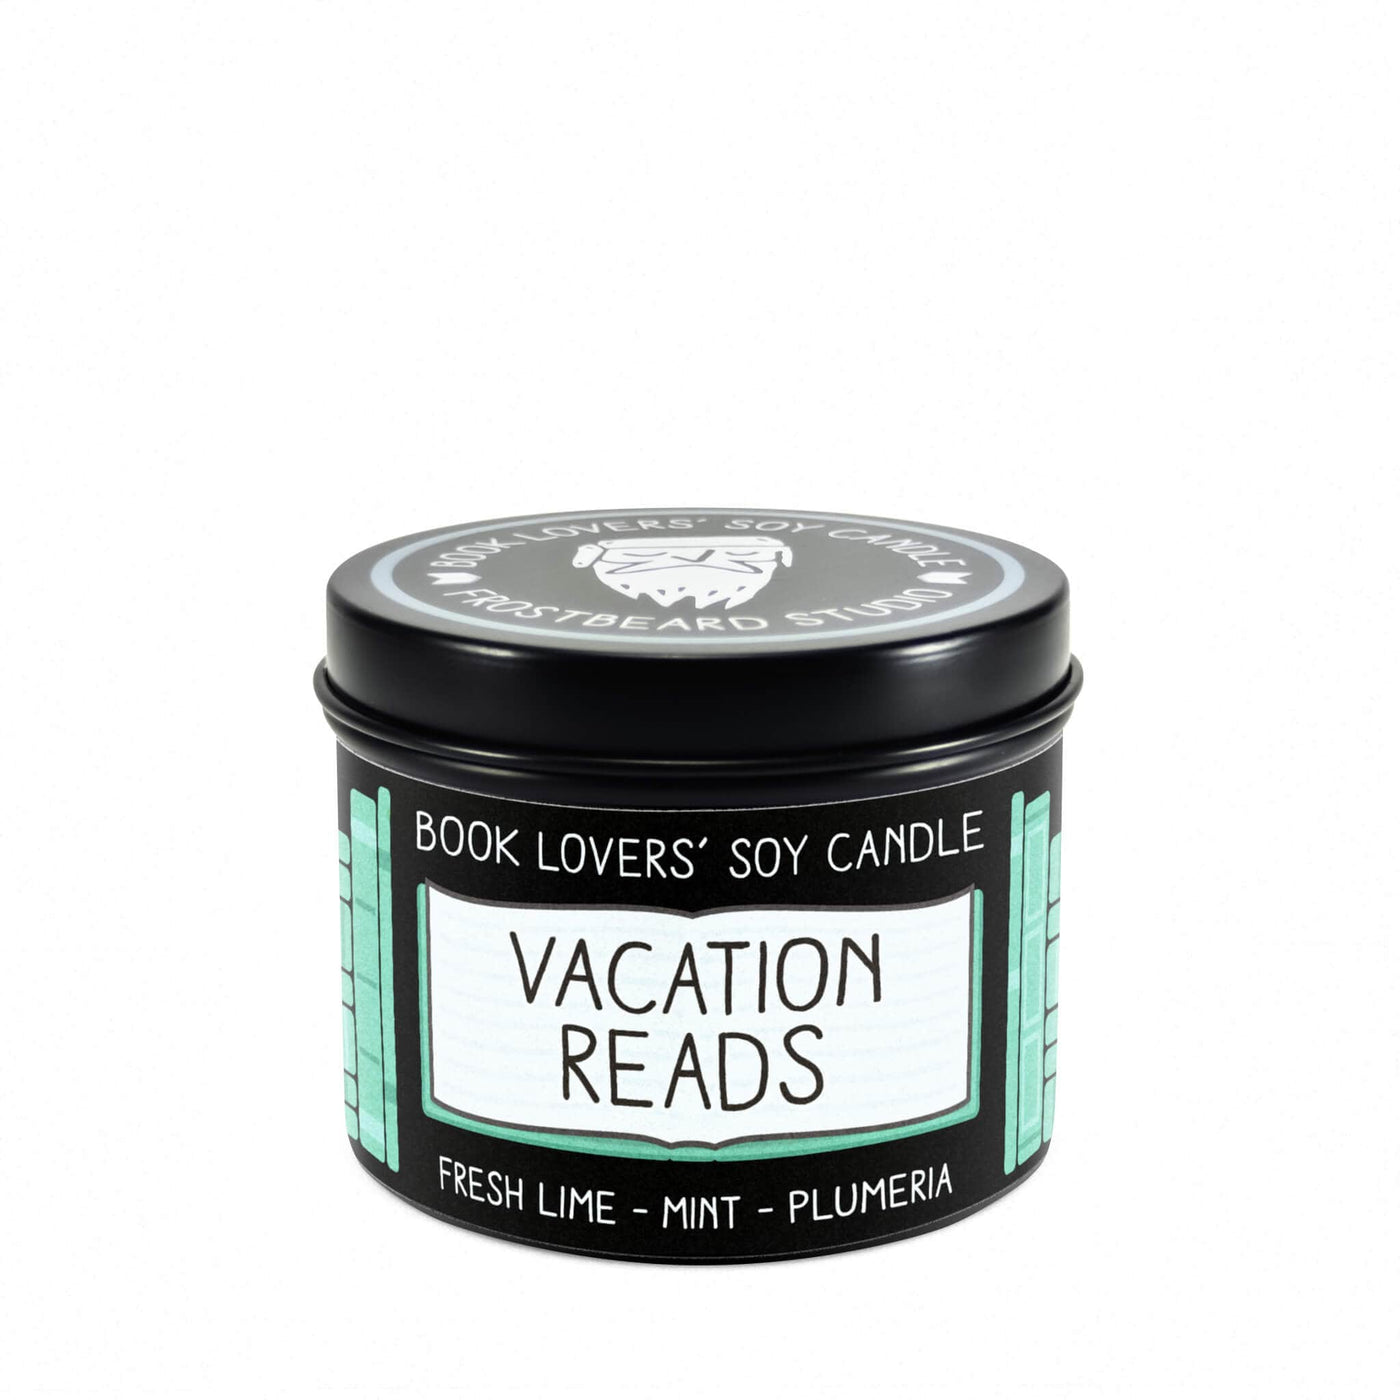 Vacation Reads  -  4 oz Tin  -  Book Lovers' Soy Candle  -  Frostbeard Studio